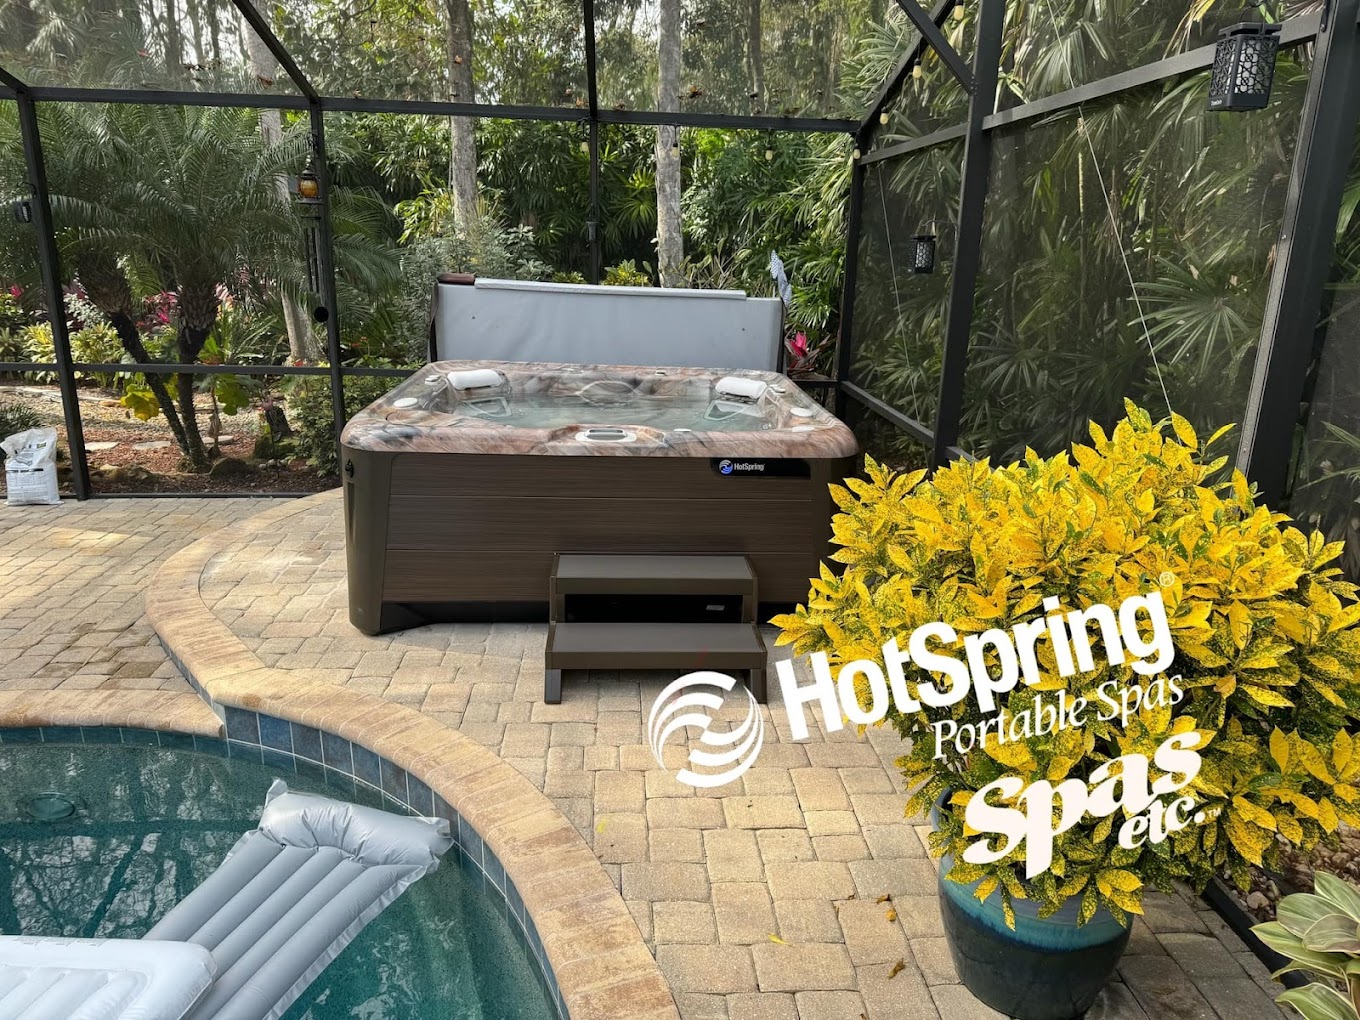 Best place to buy a hot tub in Orlando and Daytona